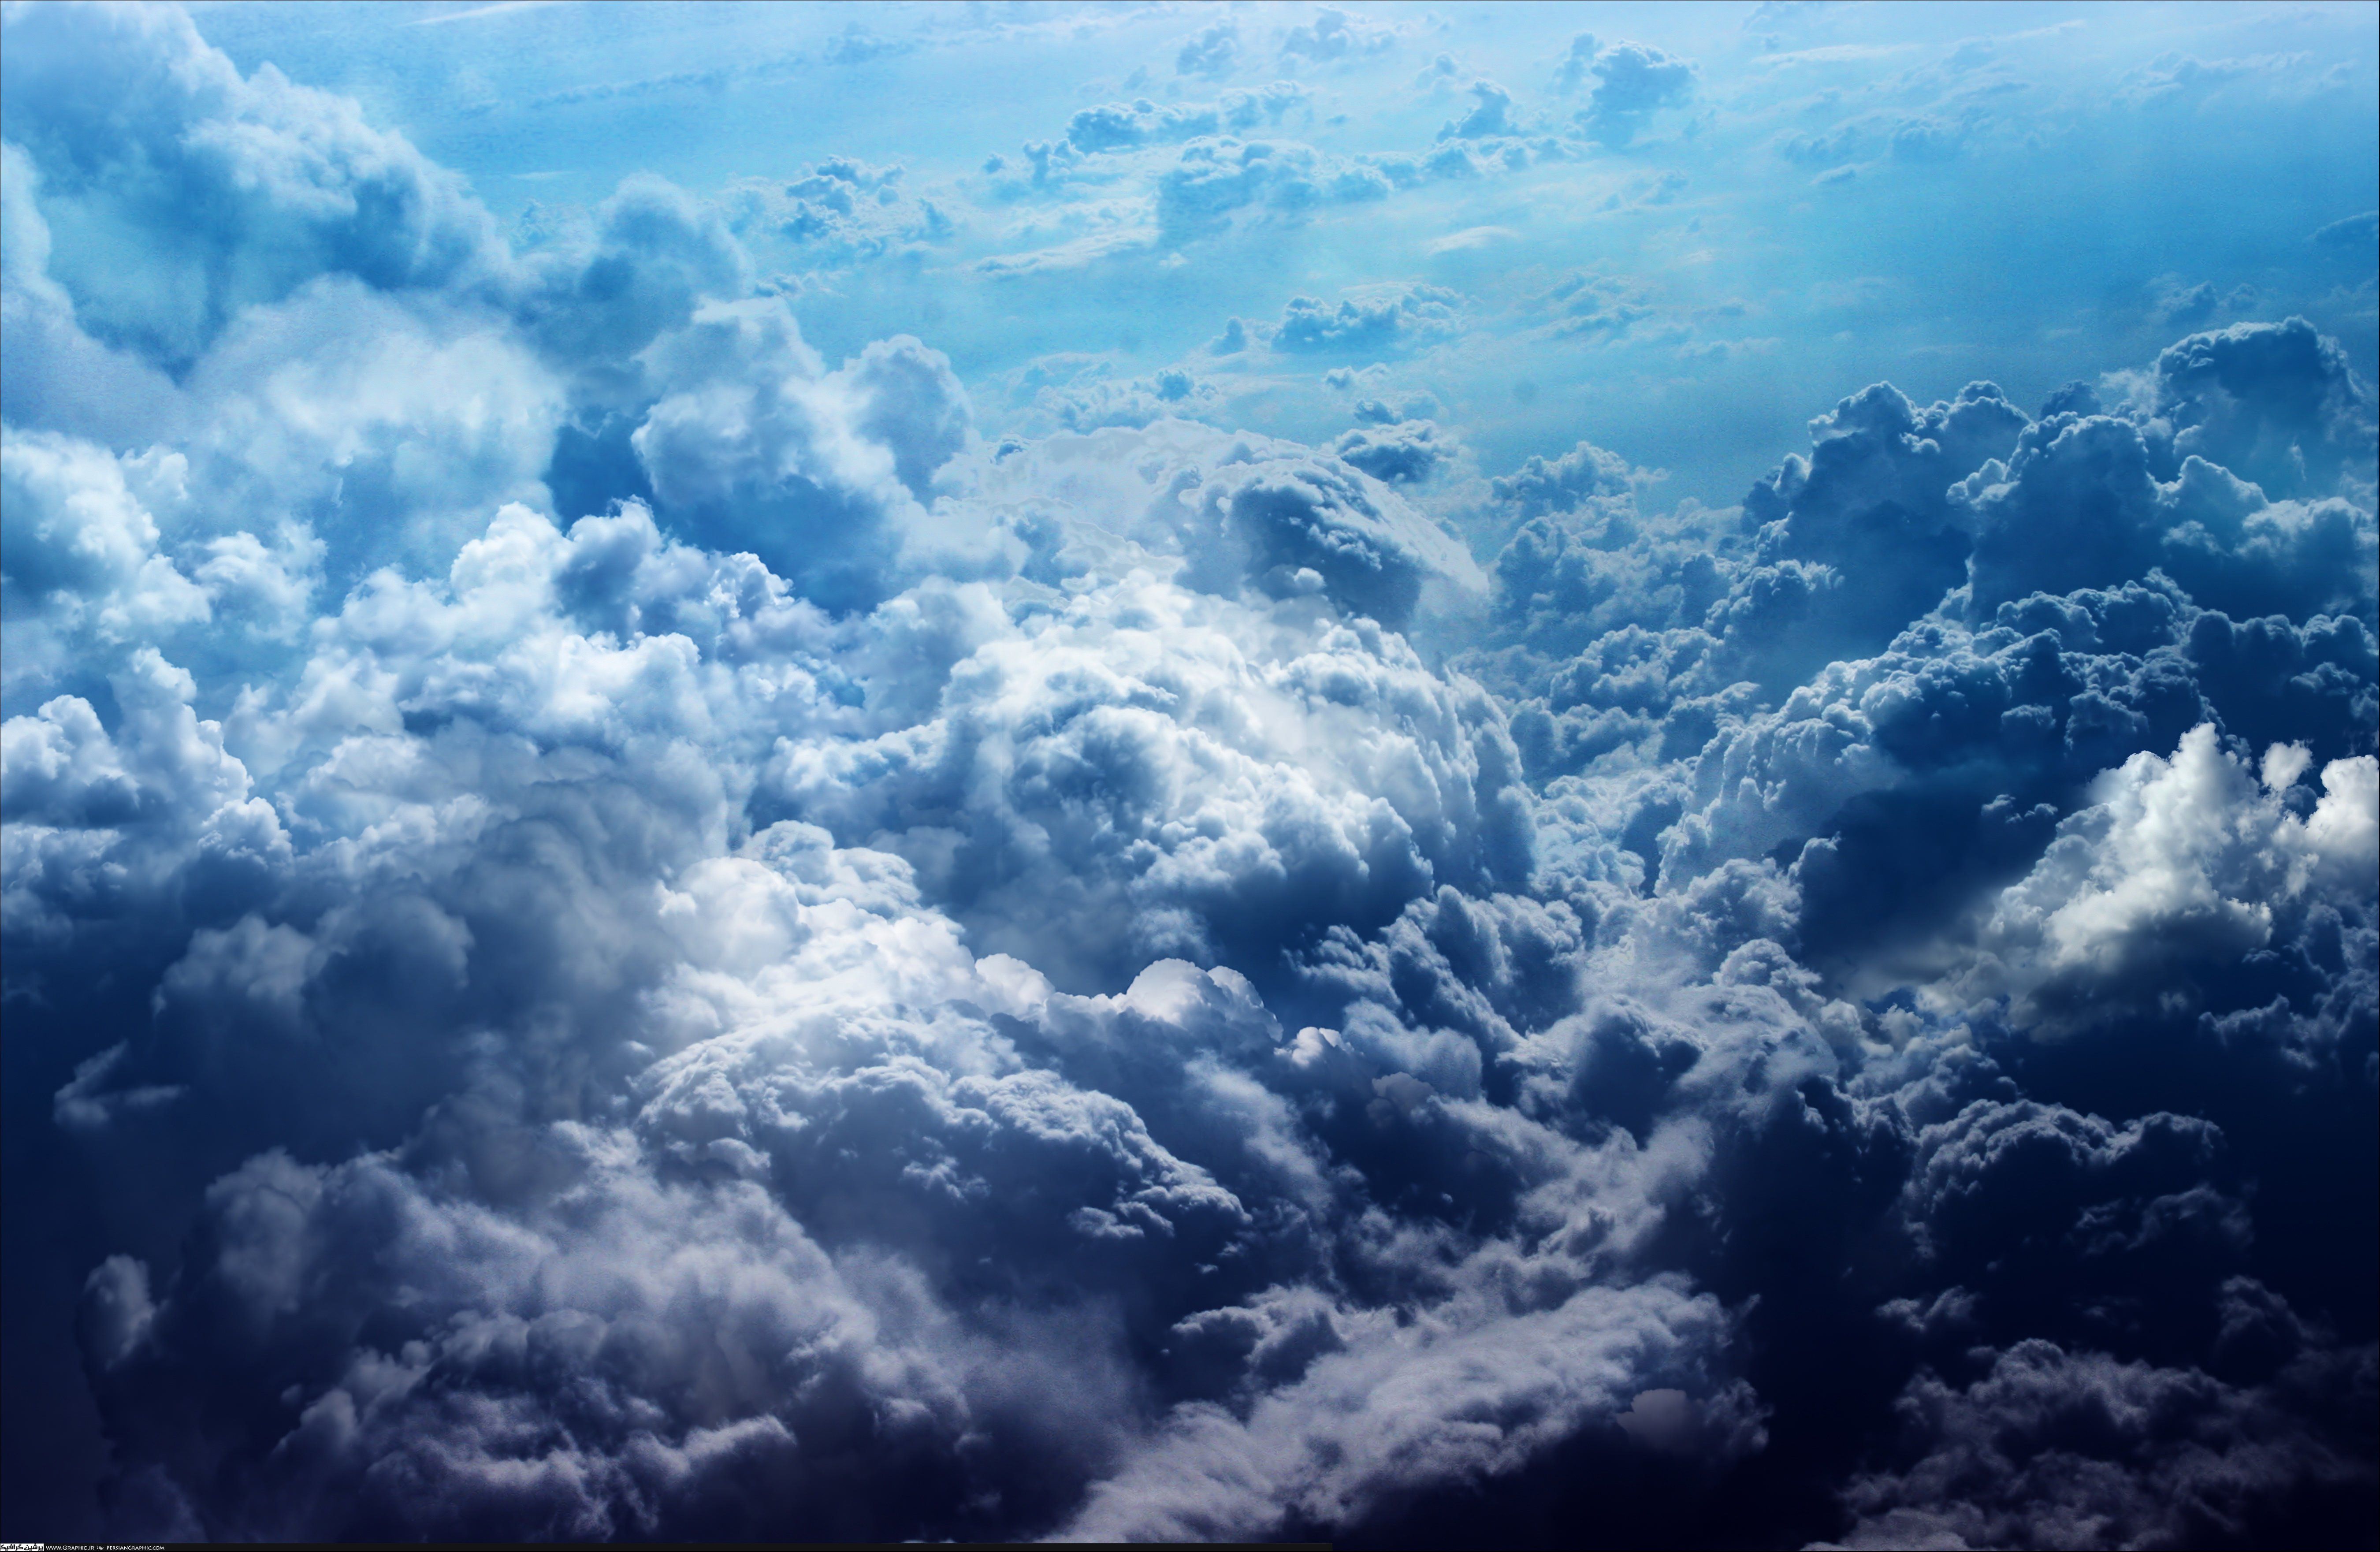 A picture of clouds in the sky - Storm, cloud, vintage clouds